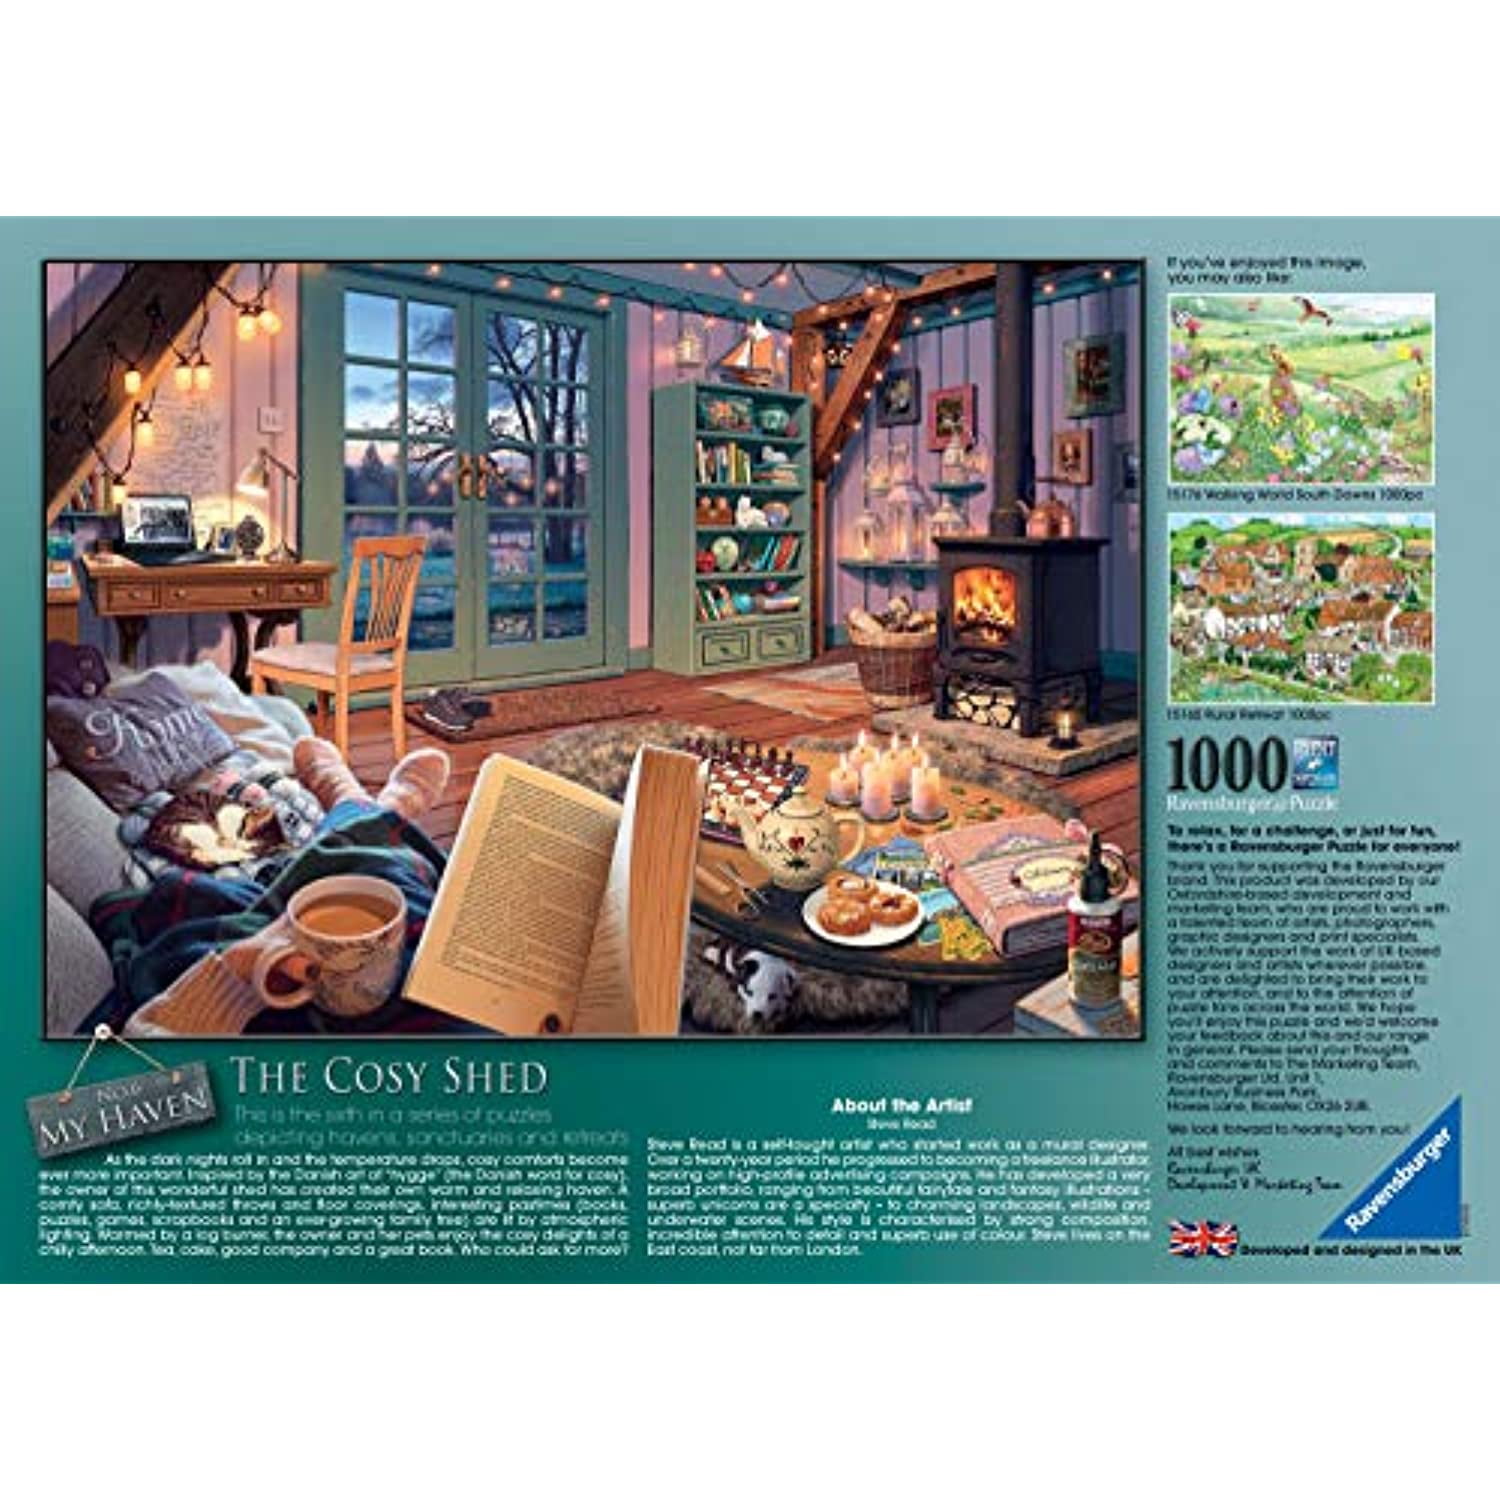 The Cosy Shed 1000pc Jigsaw Puzzle 15175 for sale online Ravensburger My Haven No 6 